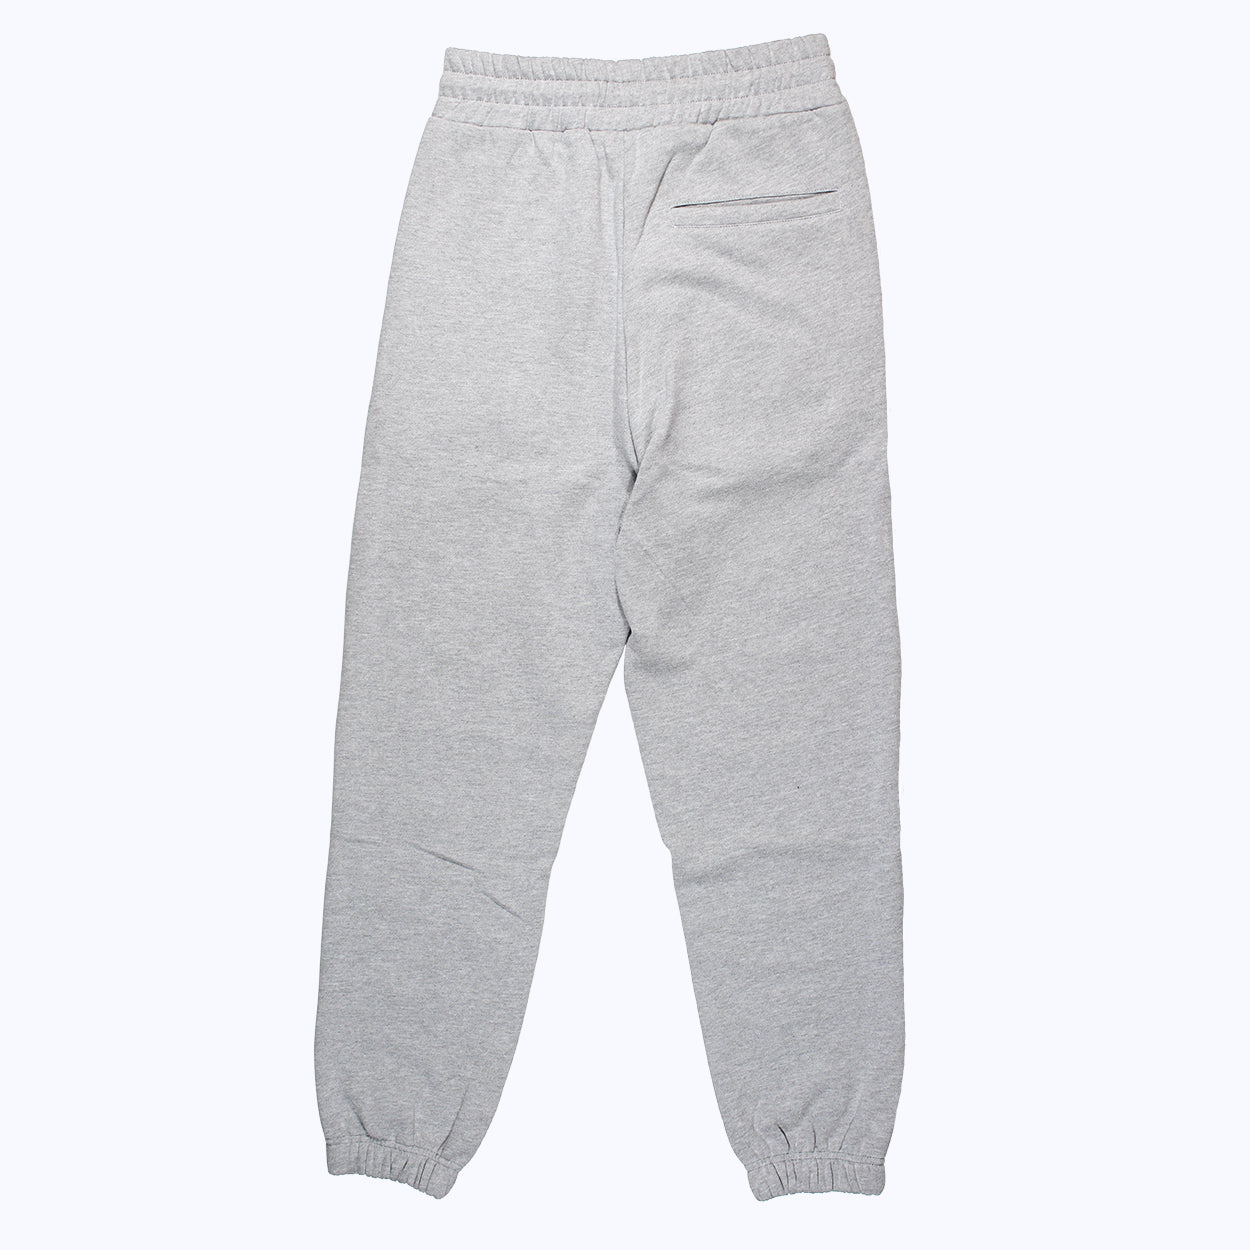 sweatpants in heather gray/red